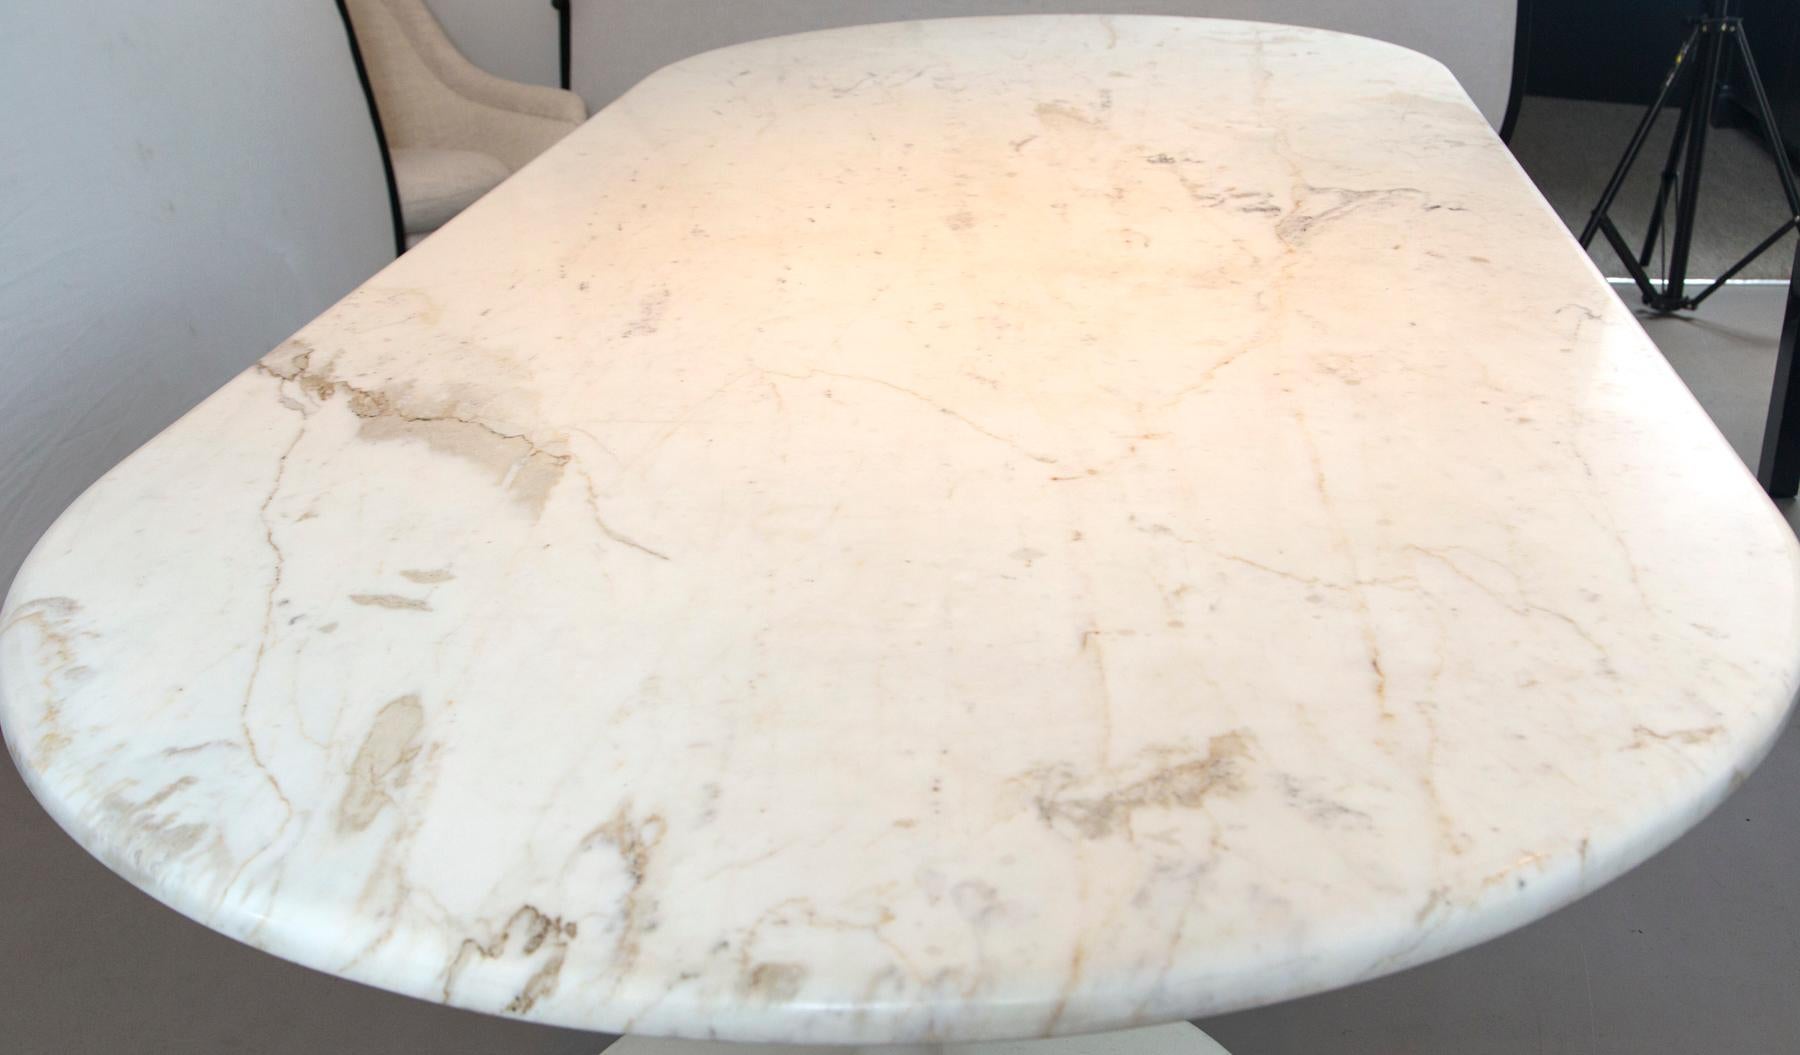 Mid-Century Modern Midcentury Tulip Dining Table Bases Attributed to Saarinen with Marble Top